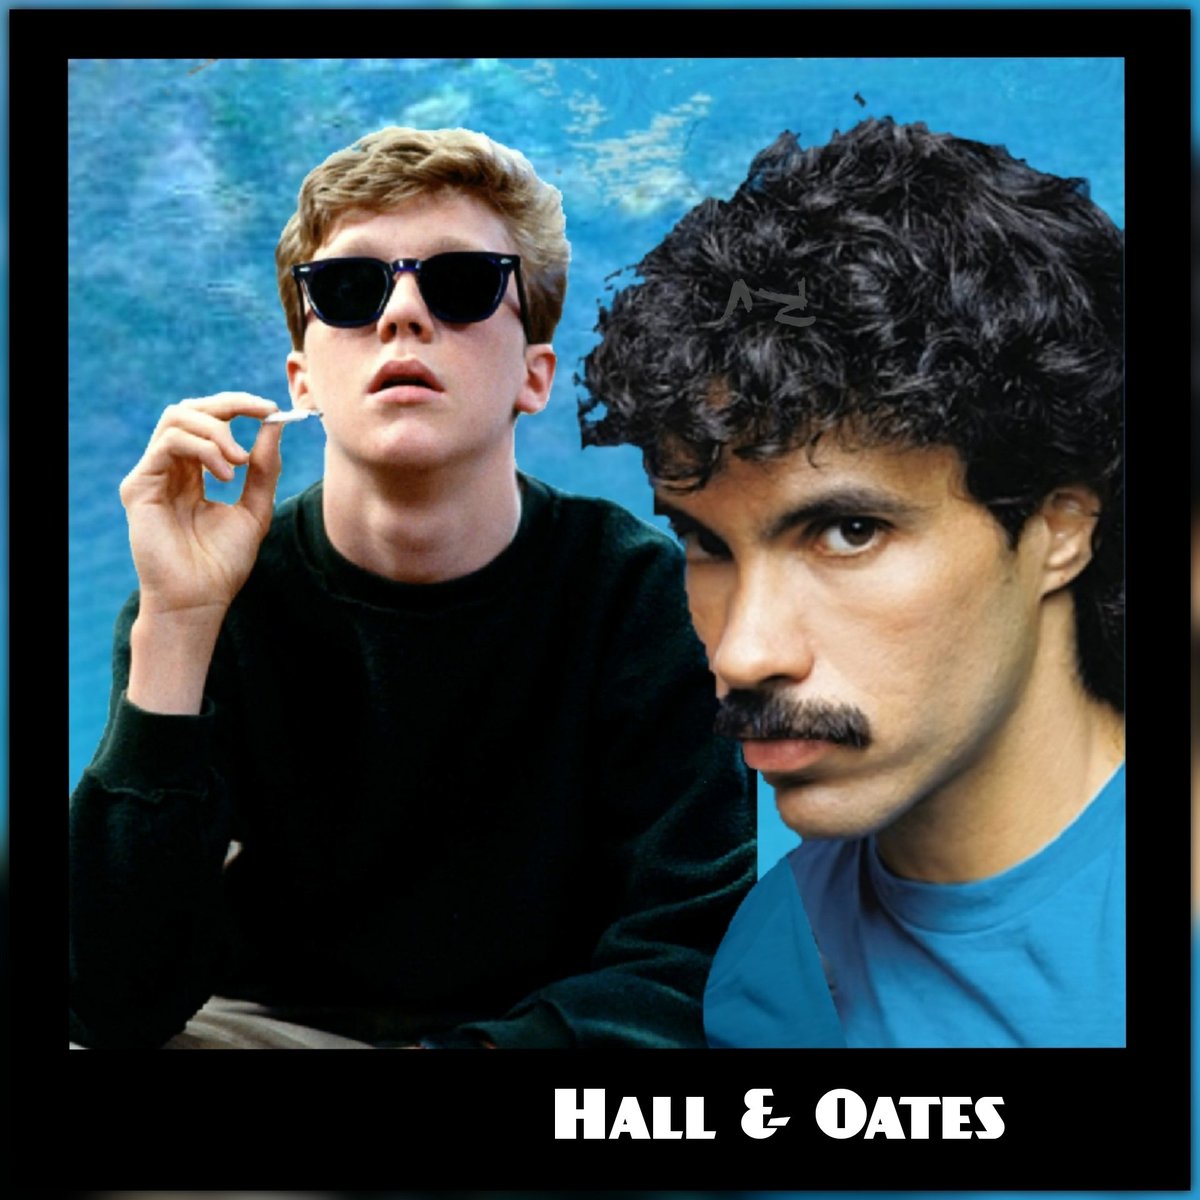 🏝️🎤⭐🎸🏝️
#hallandoates #anthonymichaelhall #johnoates #darrylhall #blue #albumcover #mustache #comedy #lol #funny #smile #happy #pun #artgallery #vogtcollection #rckvgt #nft #memes #comedian #actor #parody #musician #hollywood #music #musicmemes #sunglasses #thebreakfastclub